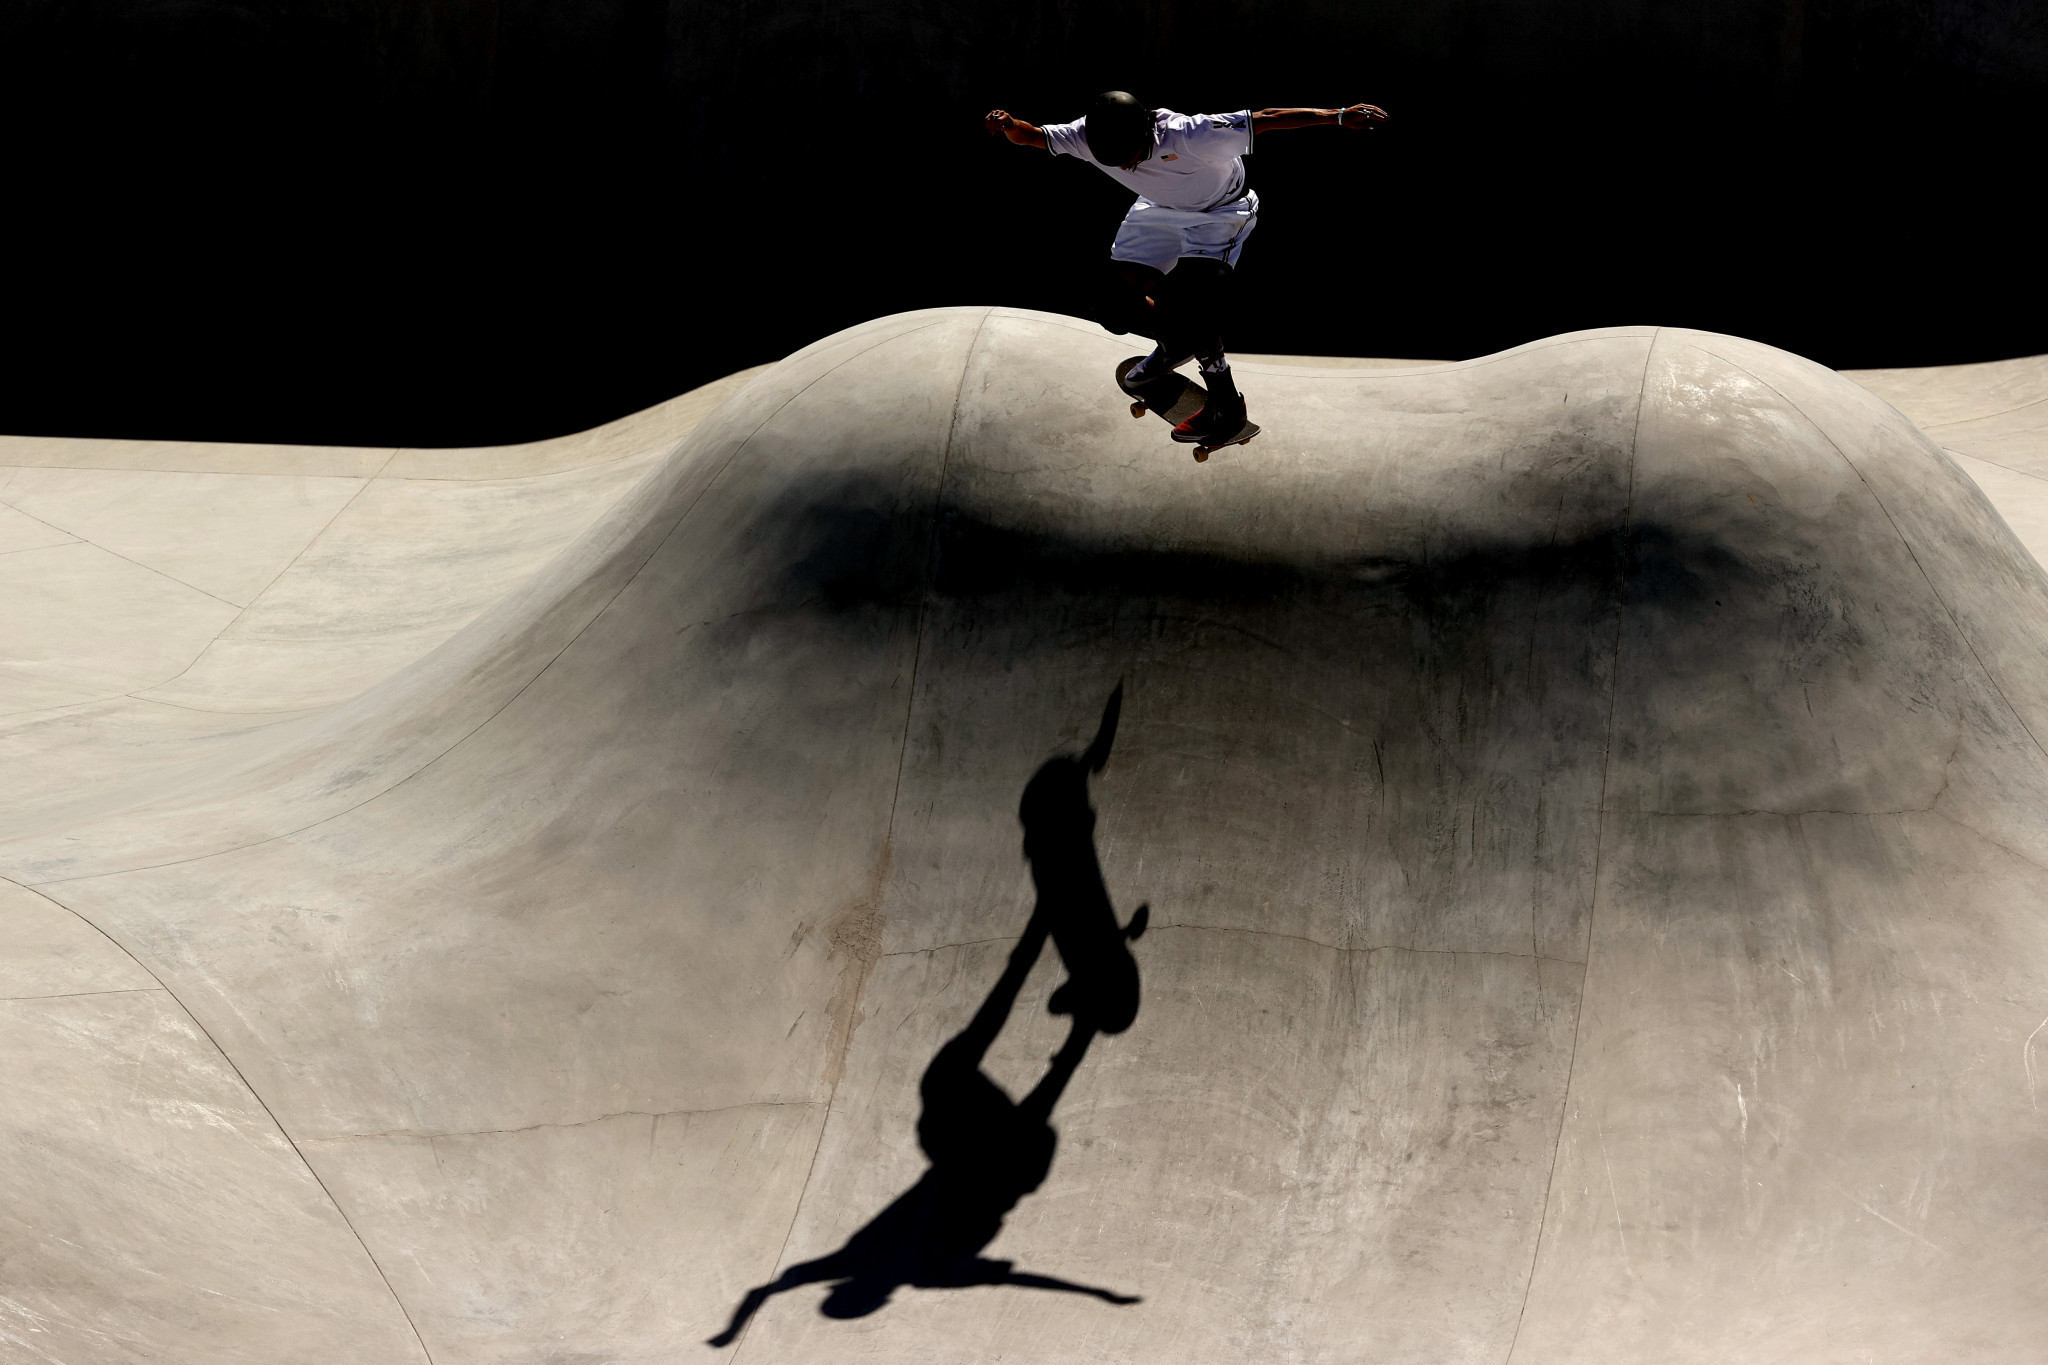 Sharjah and Rome to host next three World Skate qualifiers for Paris 2024